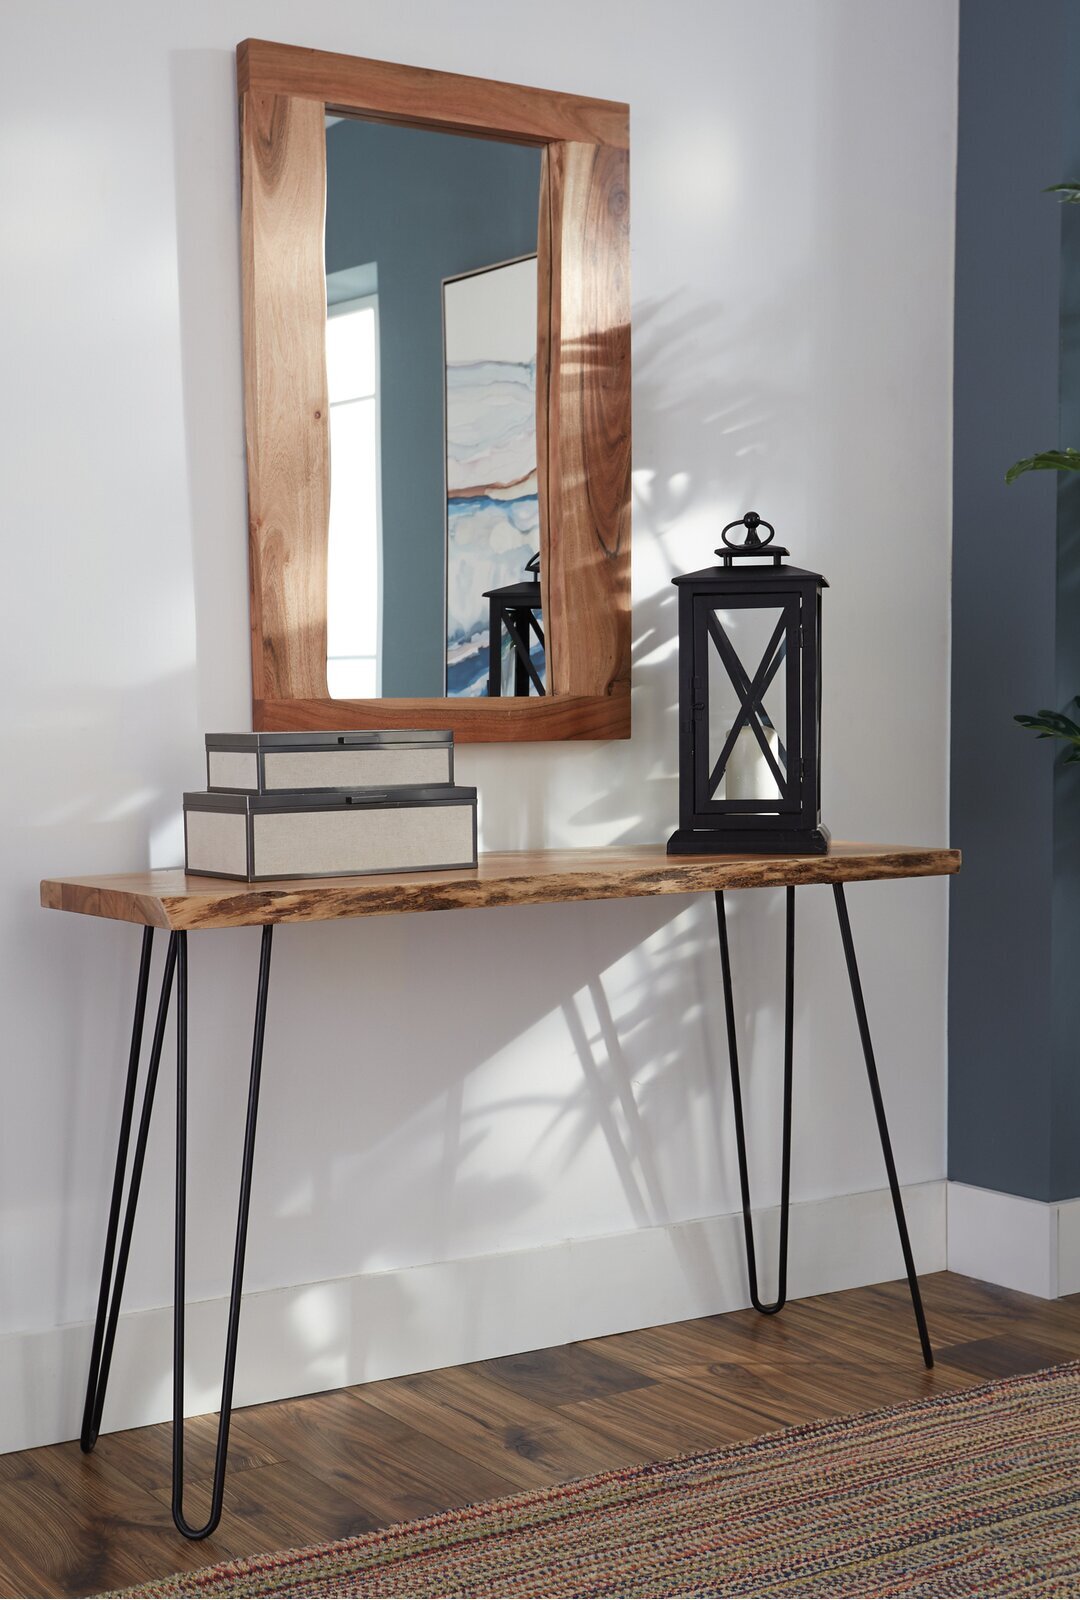 Accent table and mirror set with a modern industrial flair